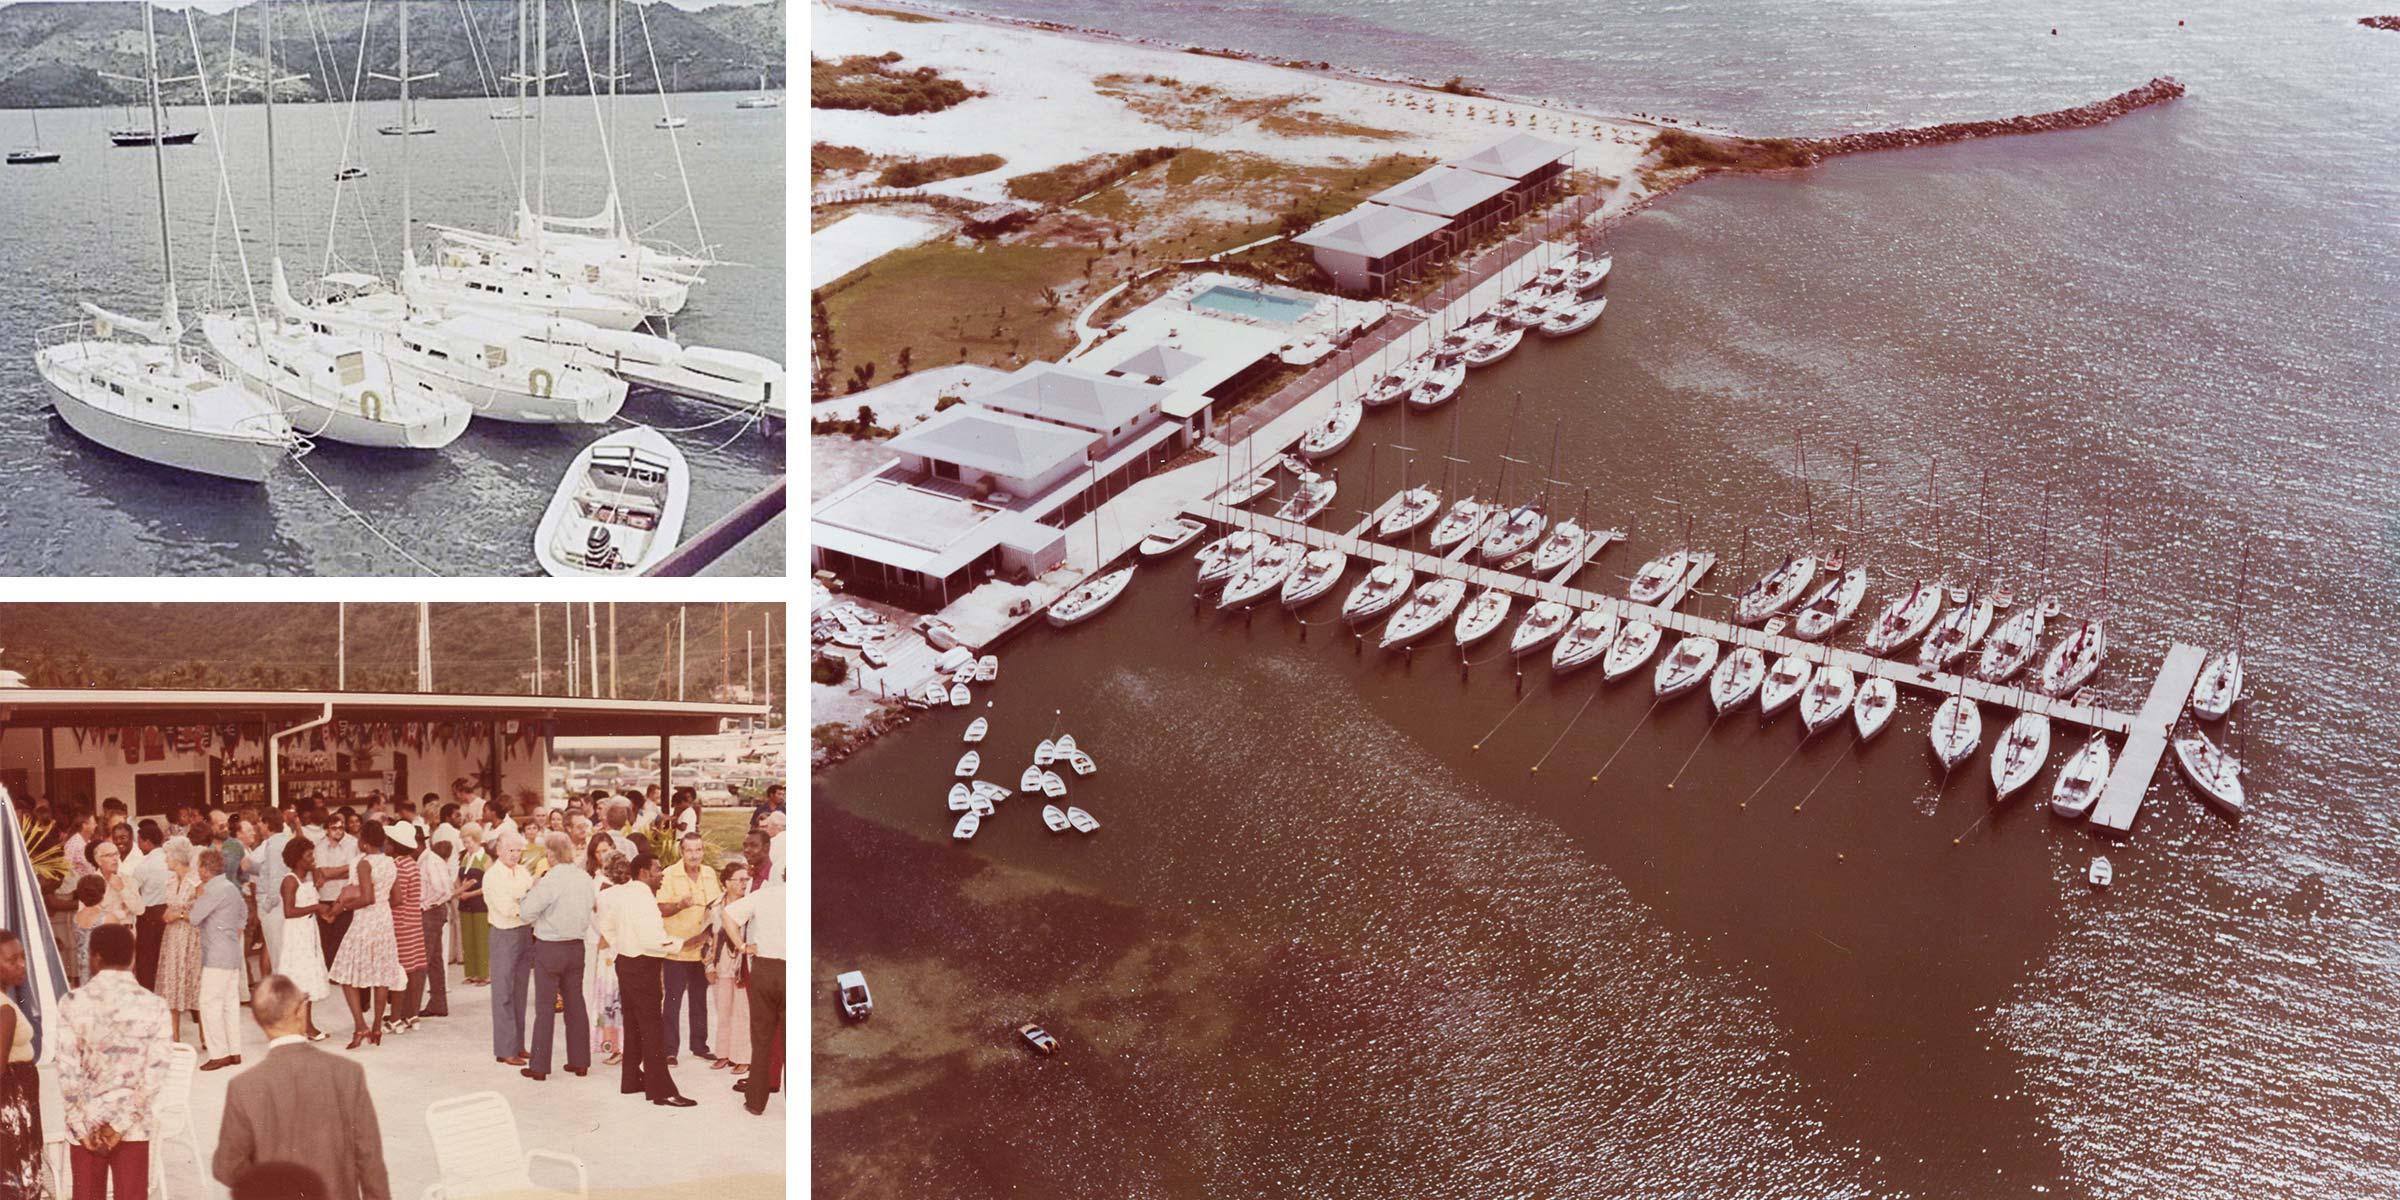 The Moorings BVI base in the 1970s and 80s